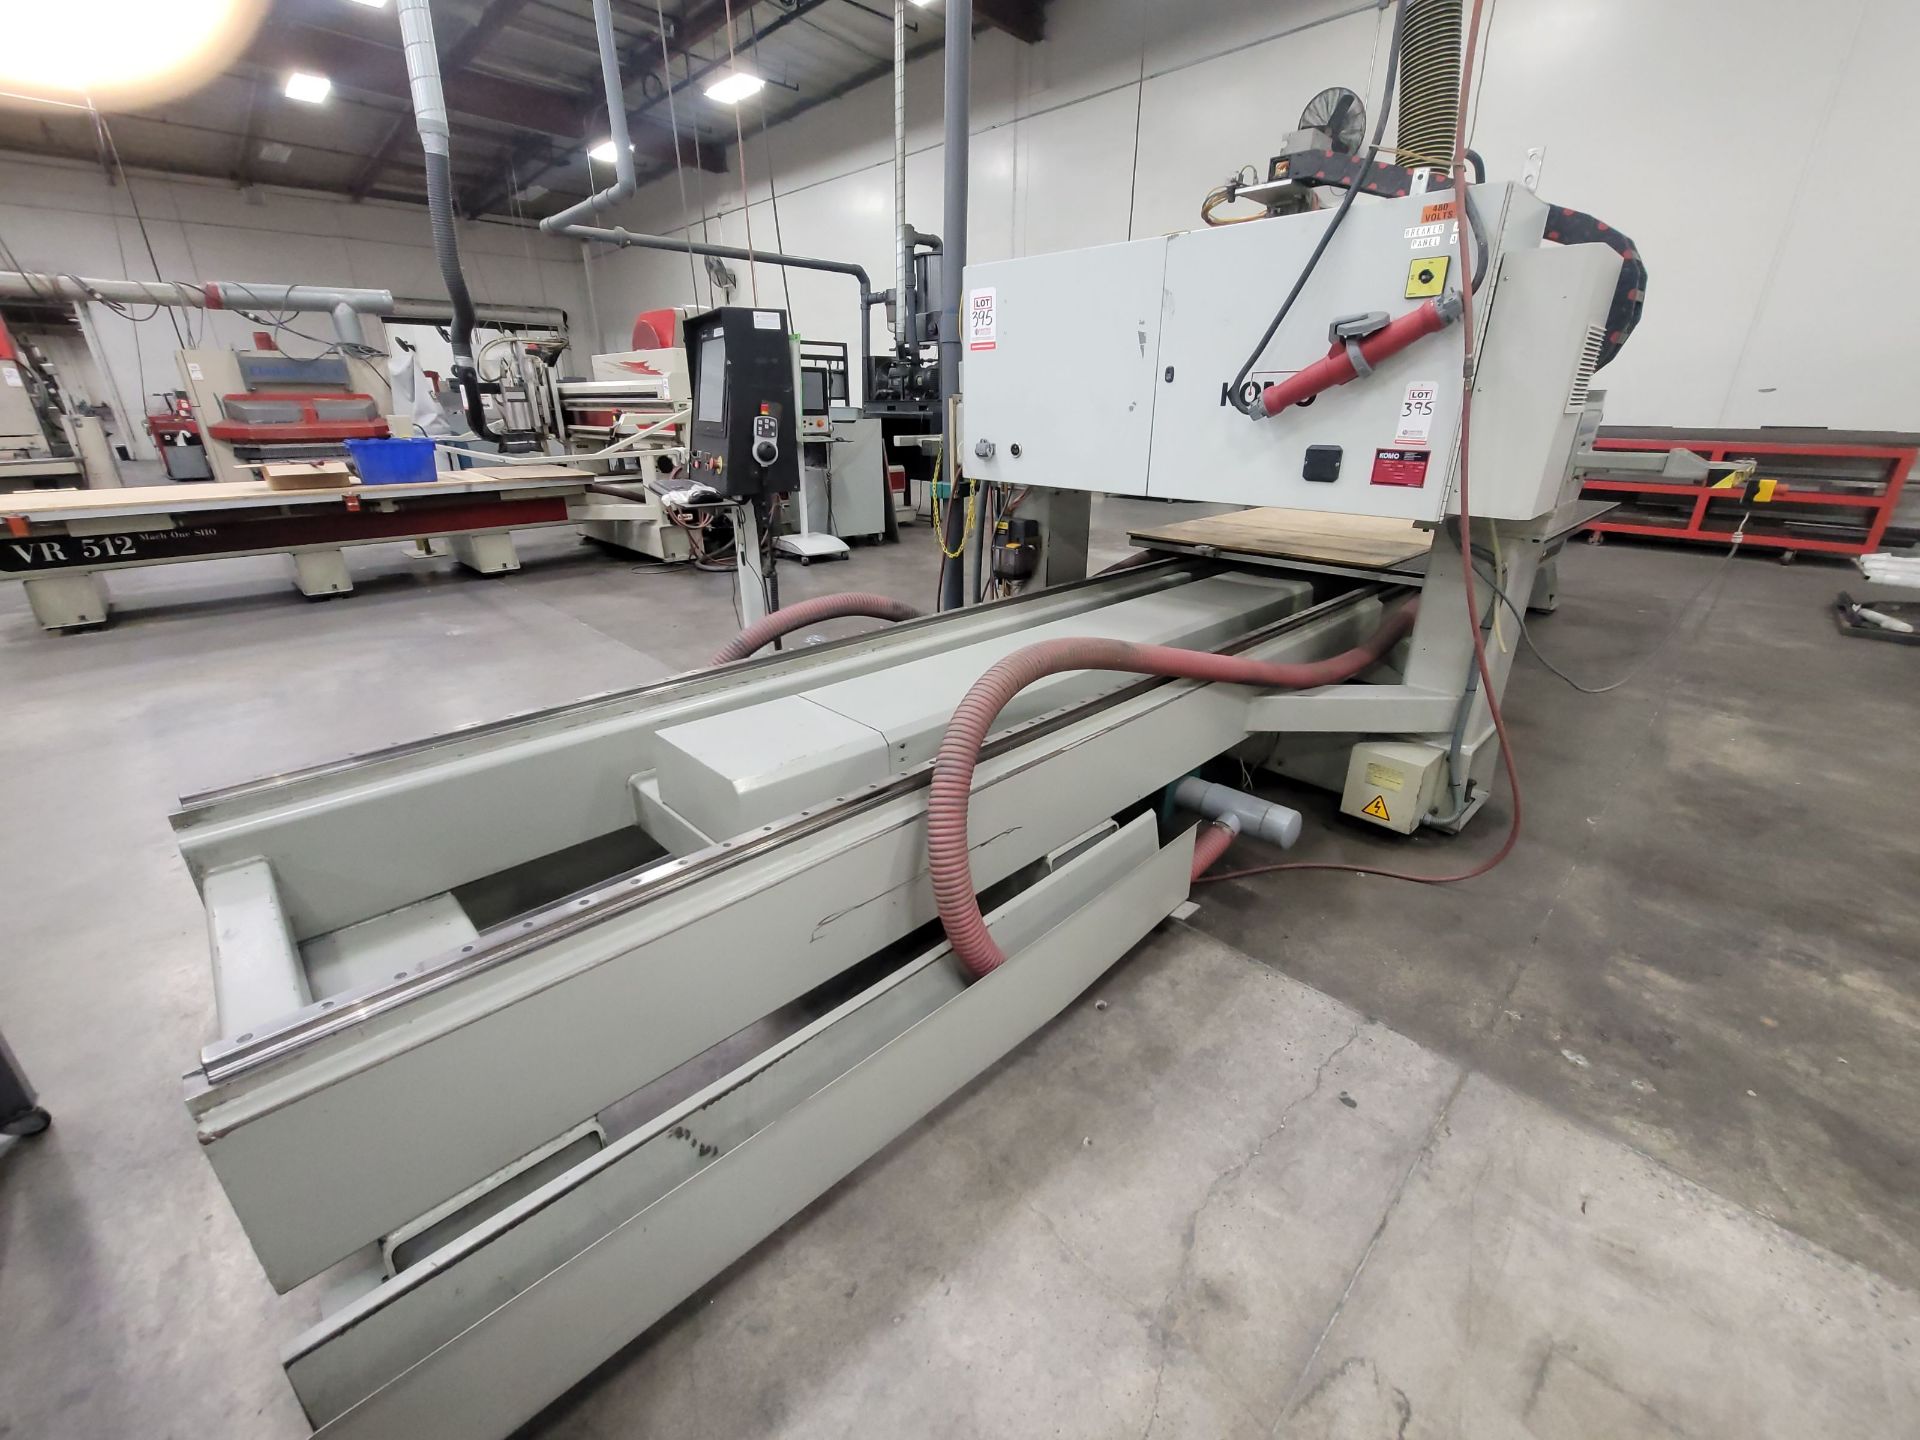 2011 KOMO CNC ROUTER, MODEL MACH ONE BT 512, S/N 01091-10 - Image 4 of 8